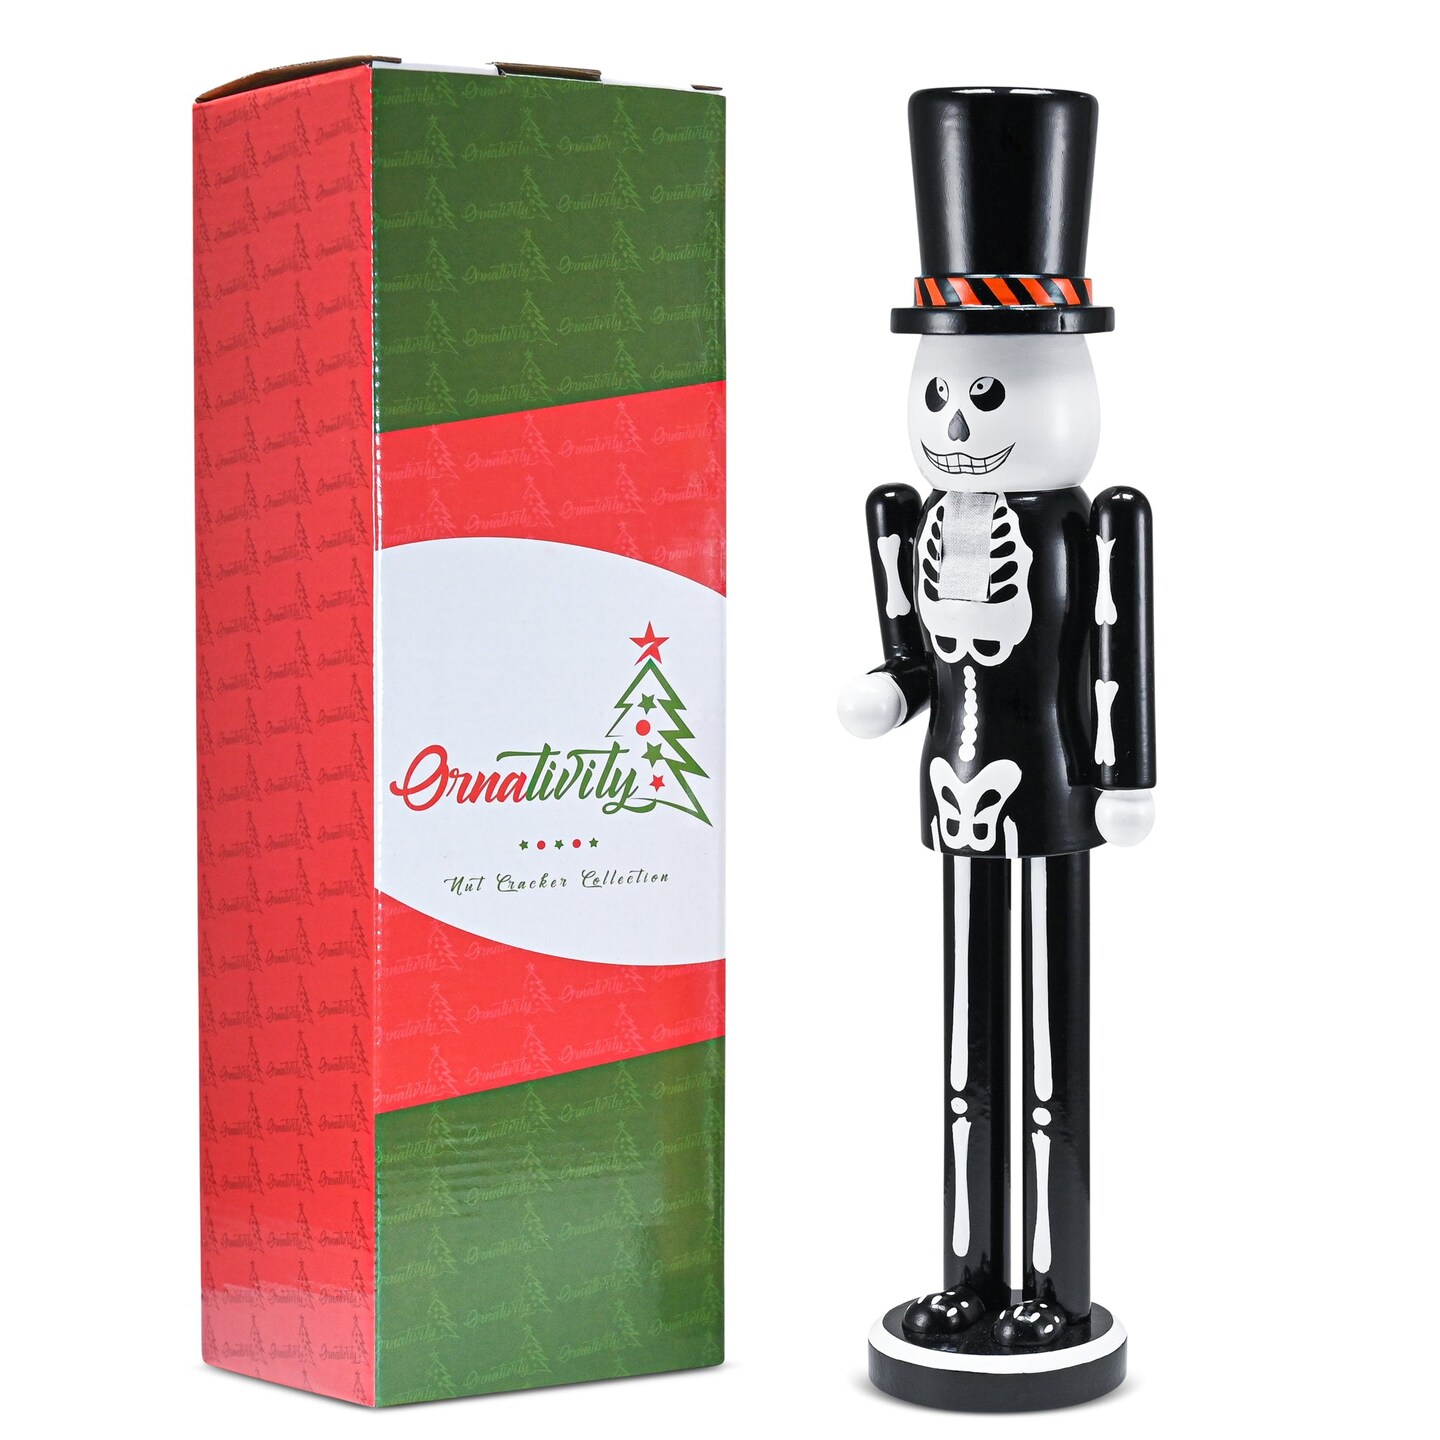 Ornativity Christmas Scary Skeleton Nutcracker &#x2013; Black and White Wooden Day of The Dead Skeletal Nutcracker Man with Top Hat Xmas and Halloween Themed Holiday Nut Cracker Doll Figure Decorations